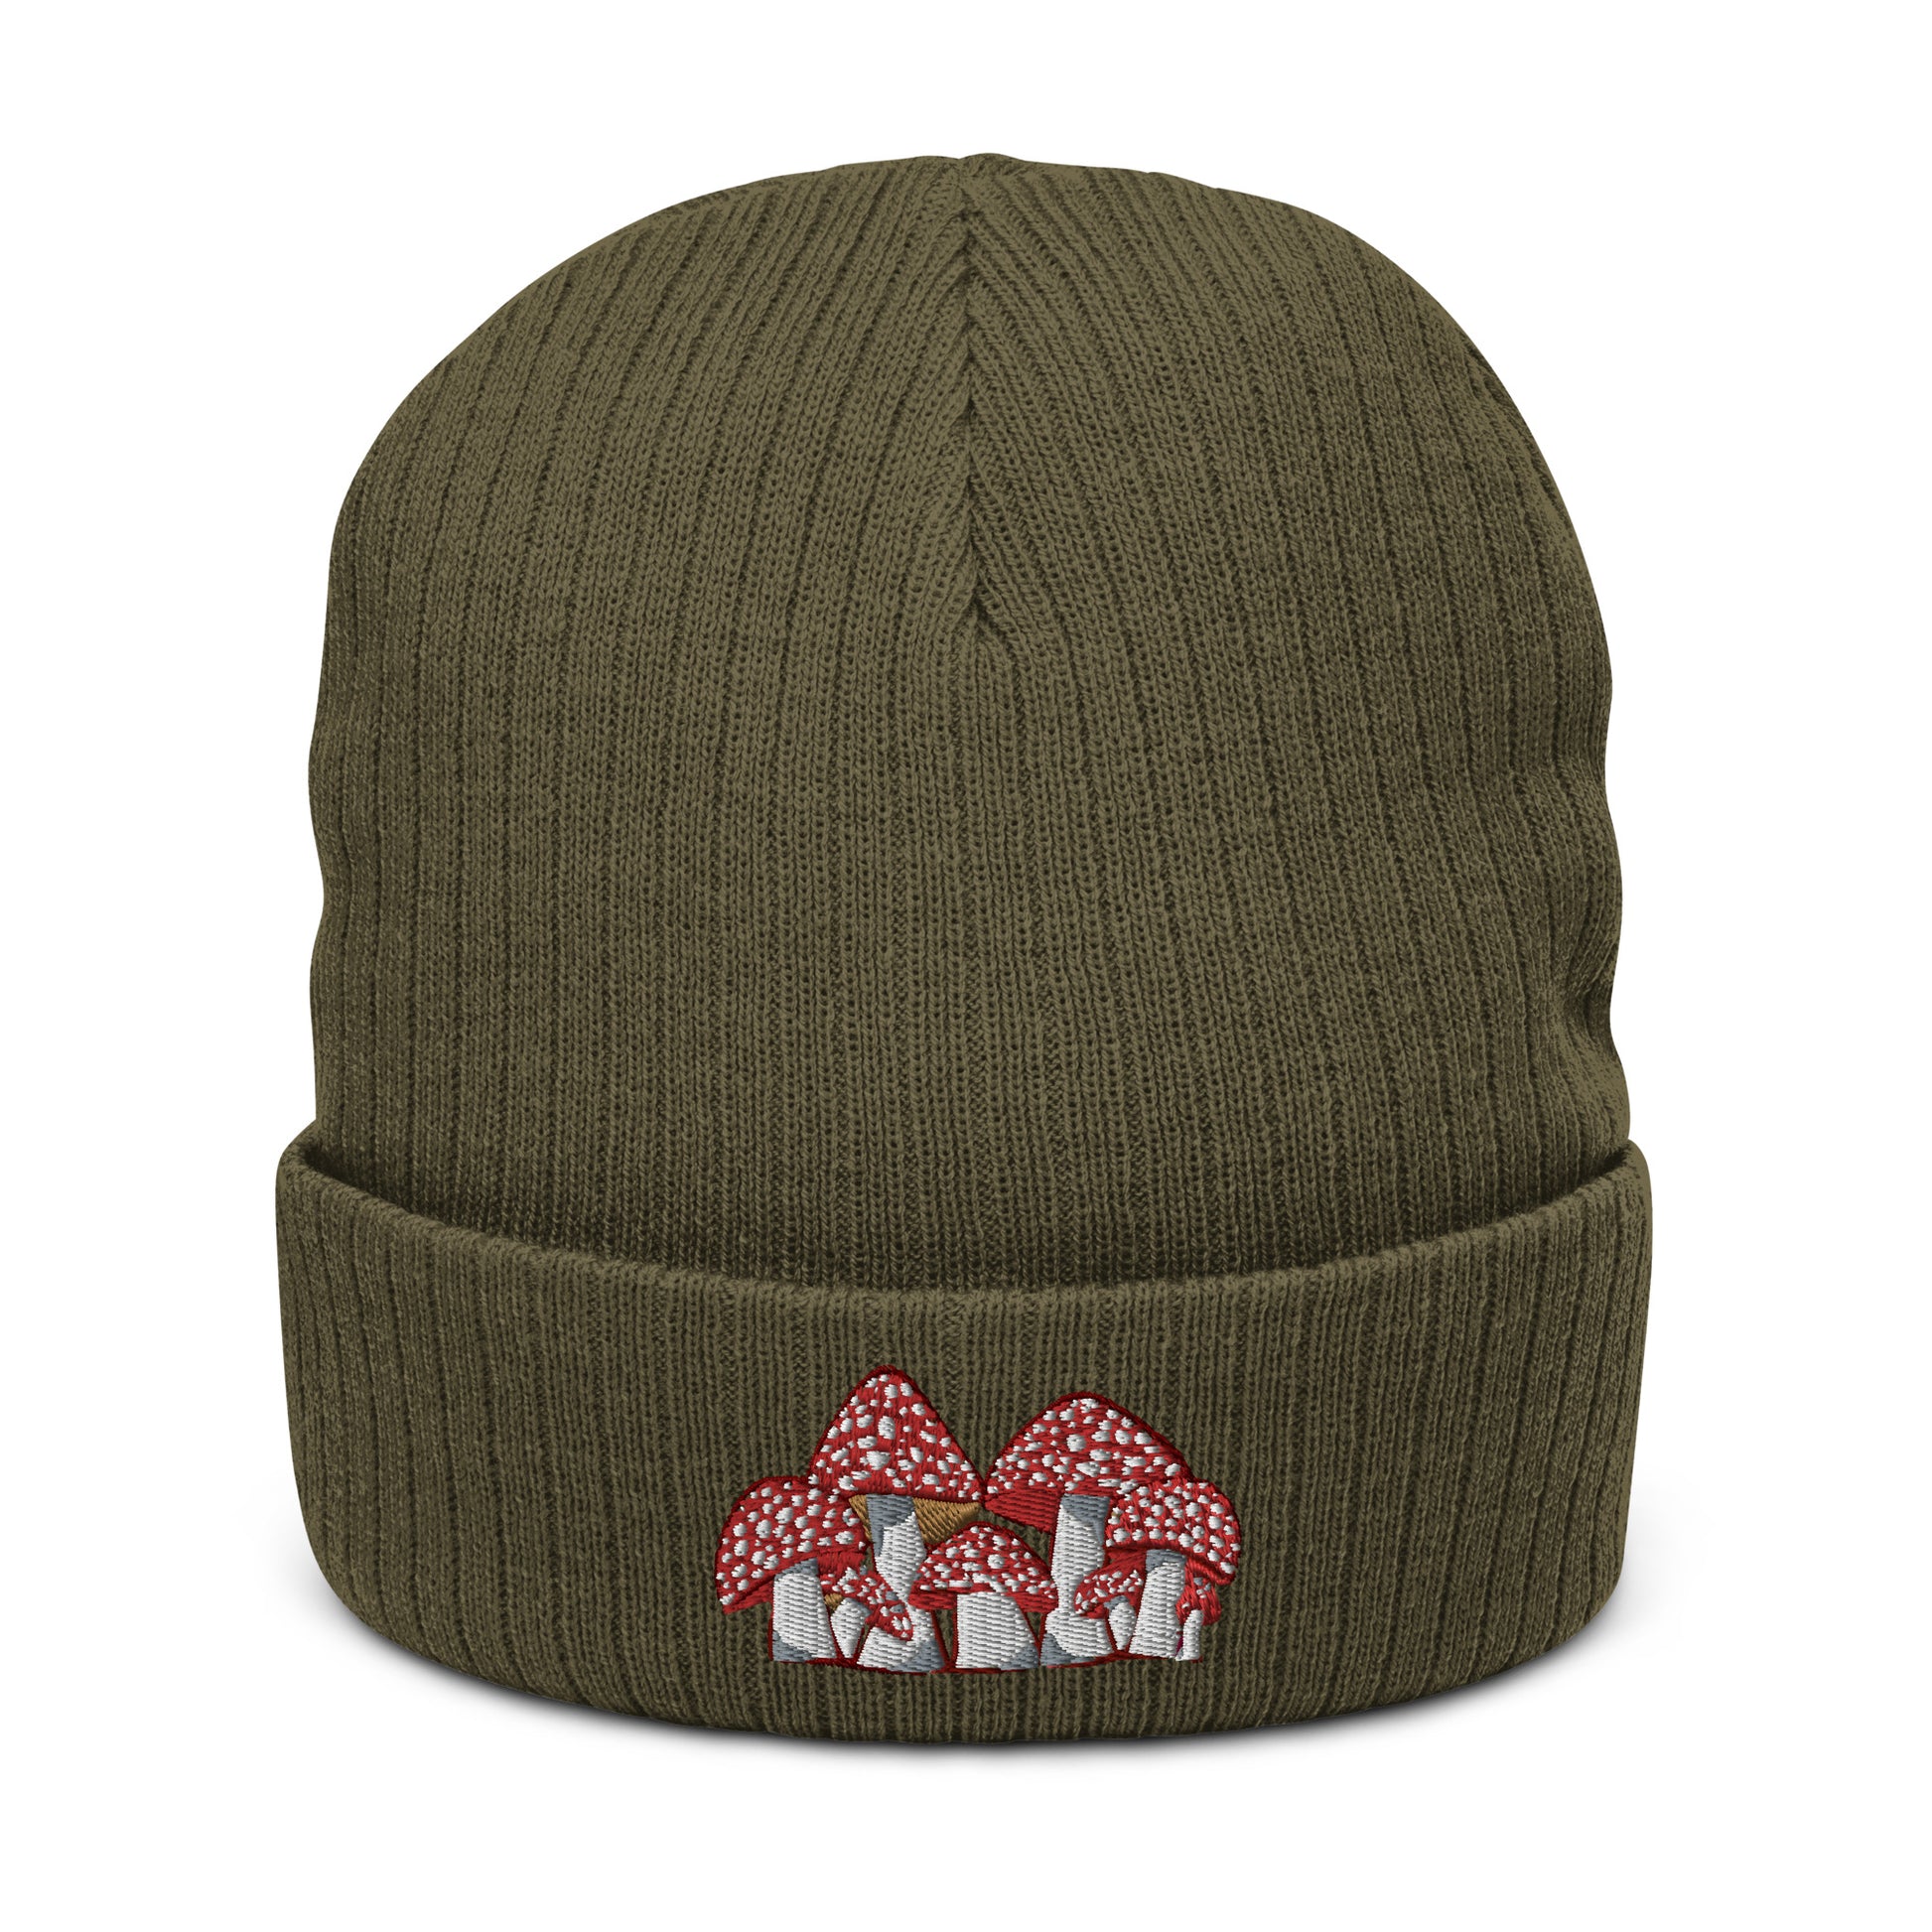 An olive green ribbed knit beanie has an embroidery of Fly Agaric mushrooms on the front.